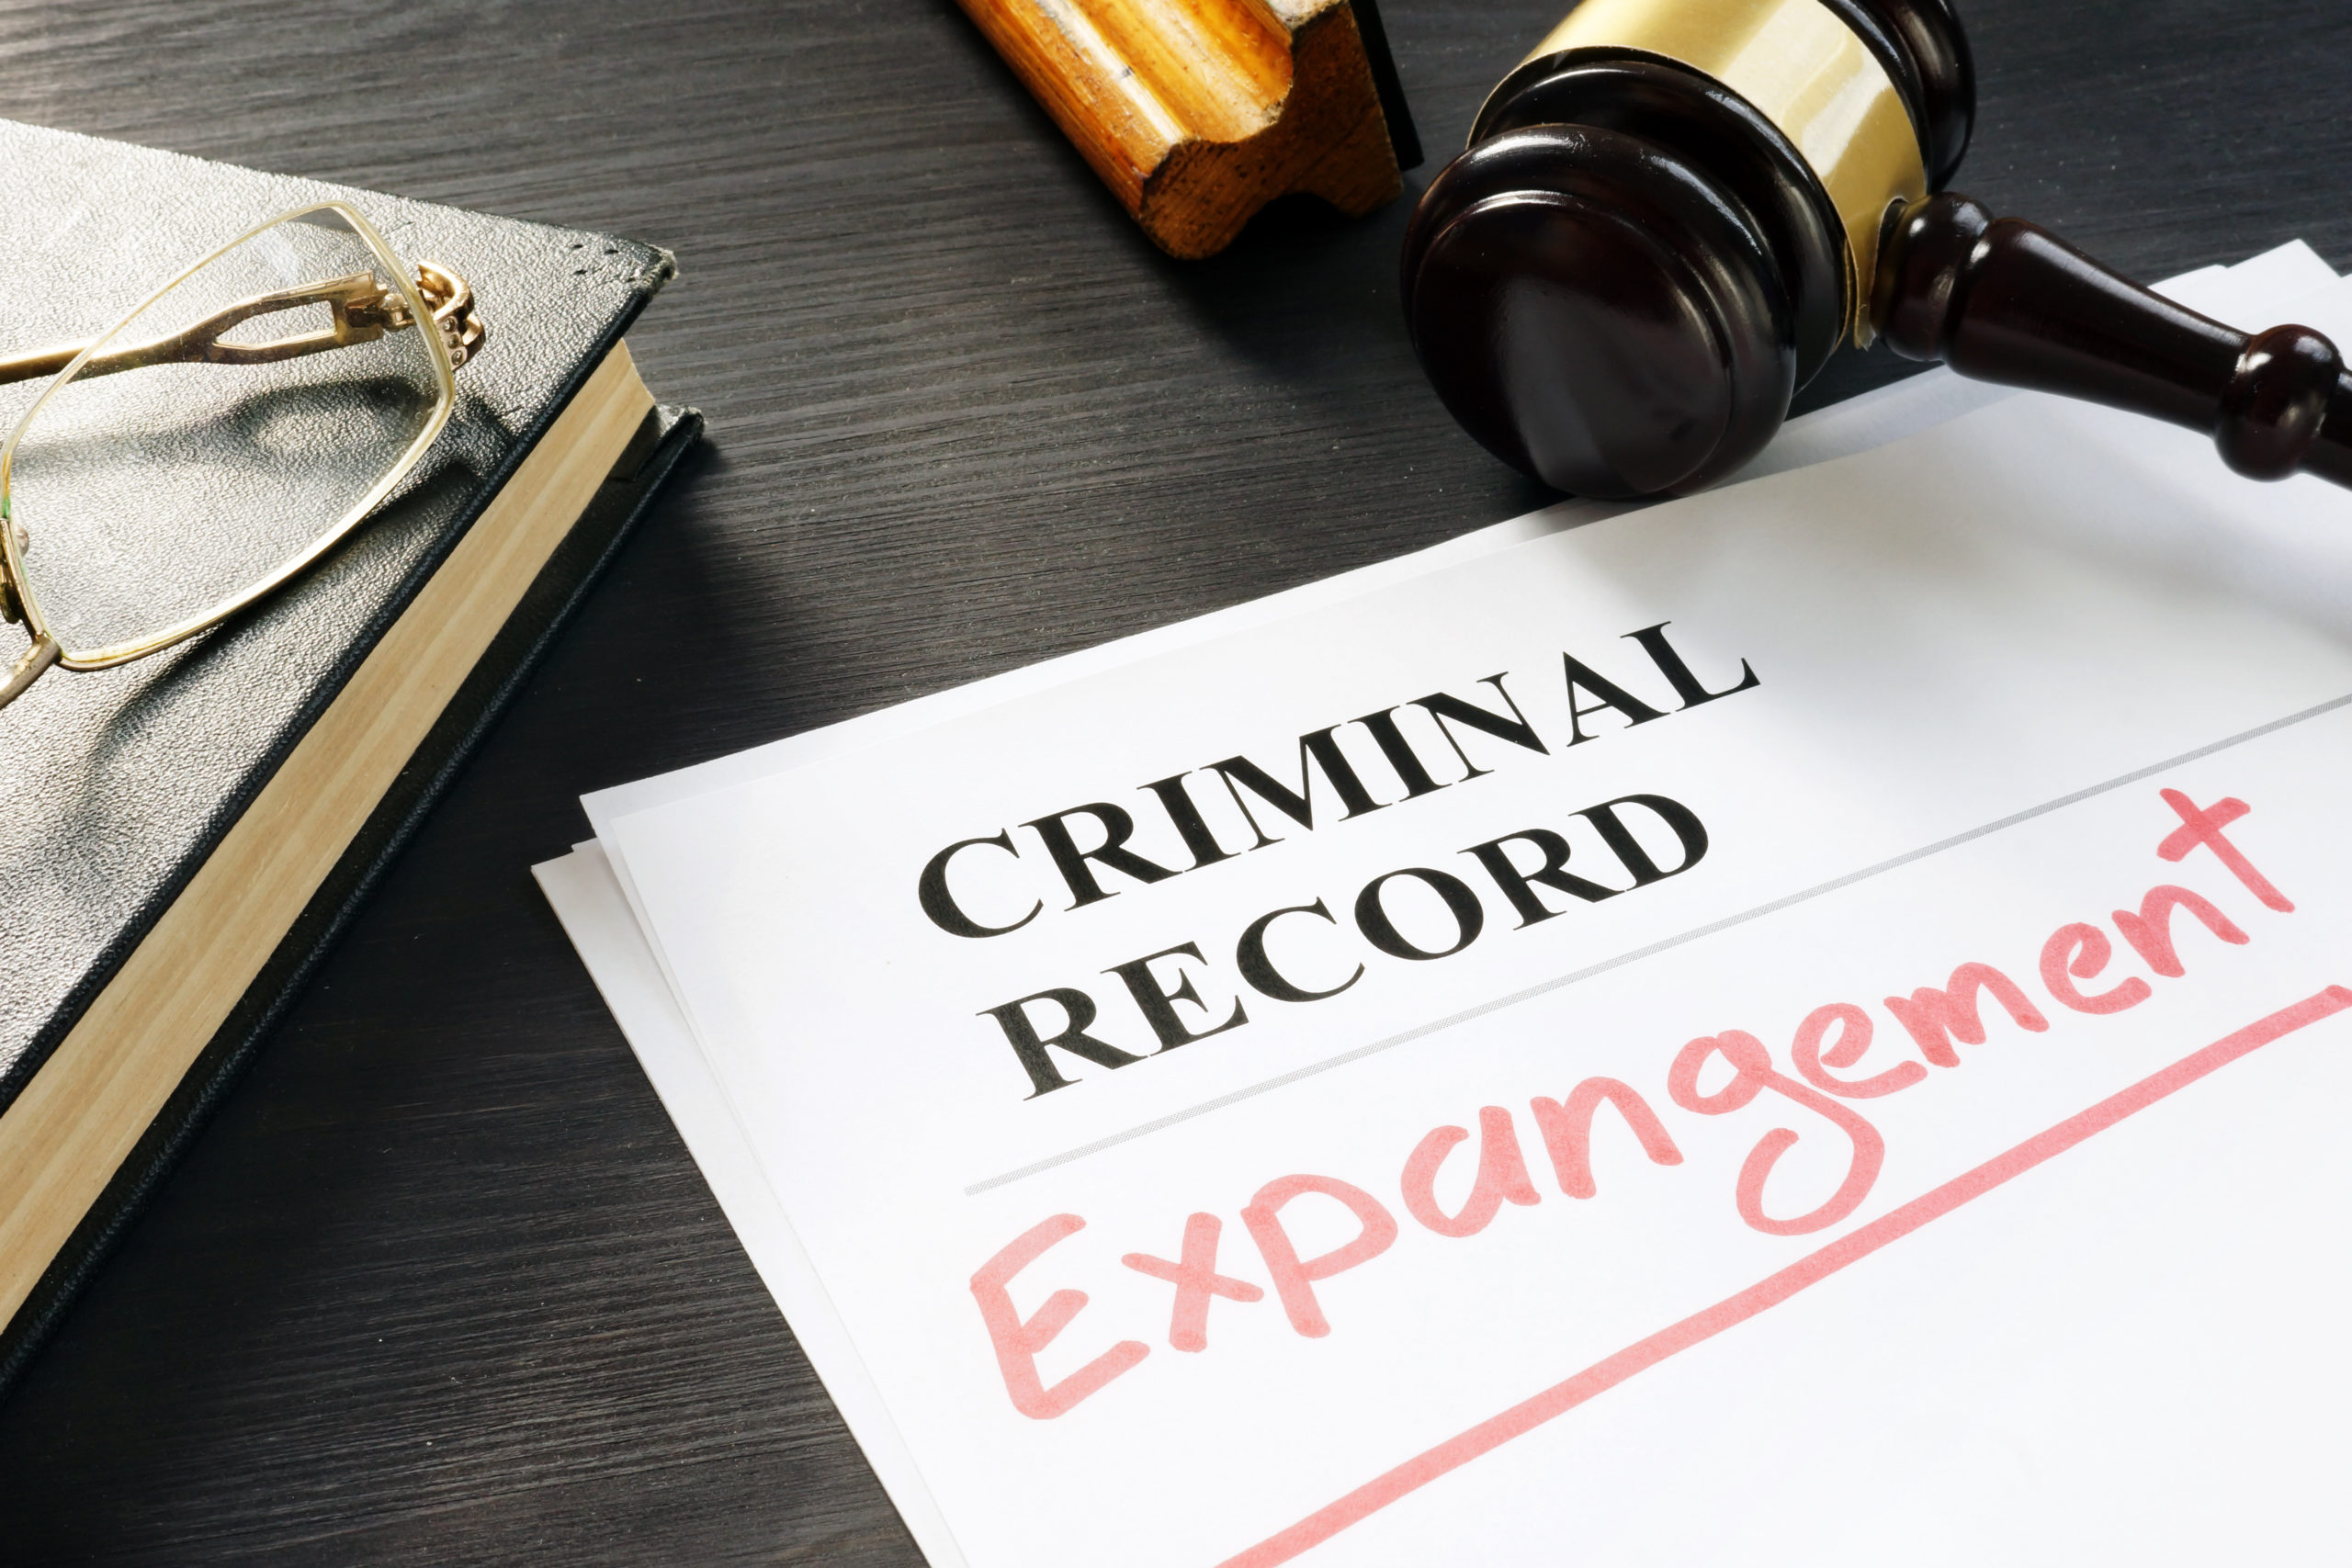 Call one of our expungement attorneys in York PA to determine if it is possible to expunge or seal your criminal record.